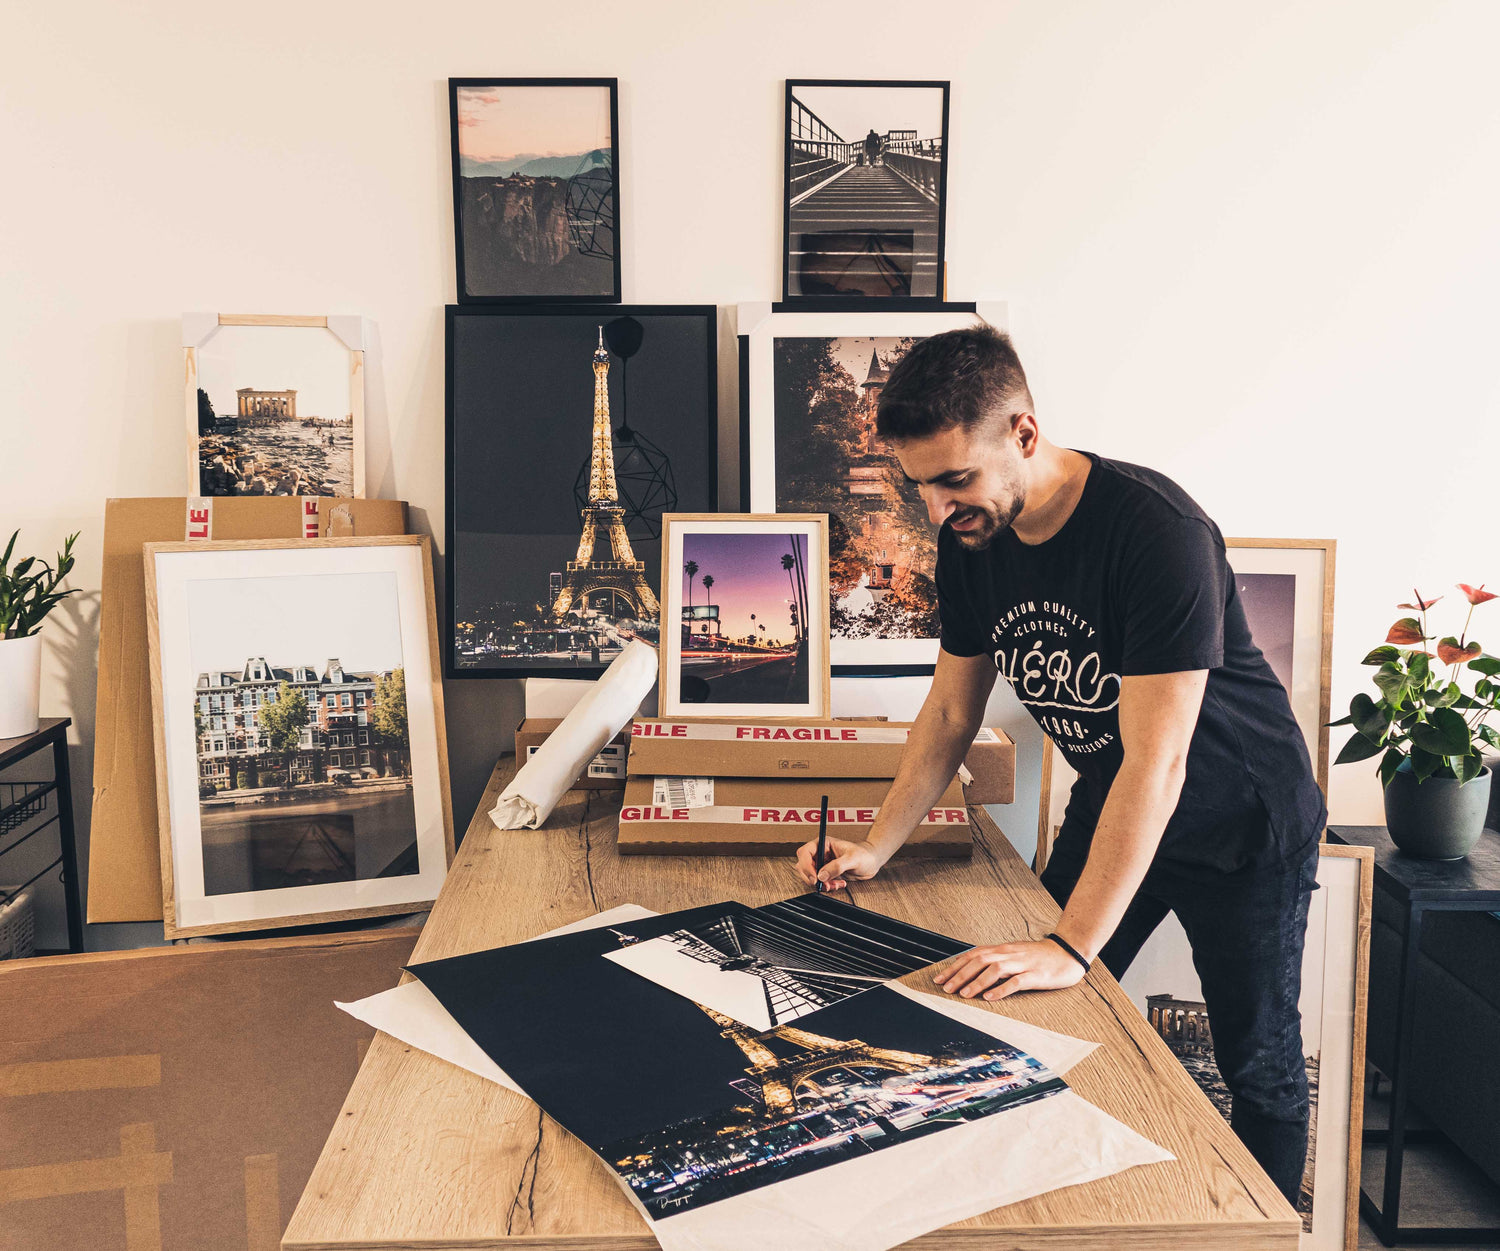 The photographer and artist standing next to a wide range of framed wall art and fine art prints that he has created